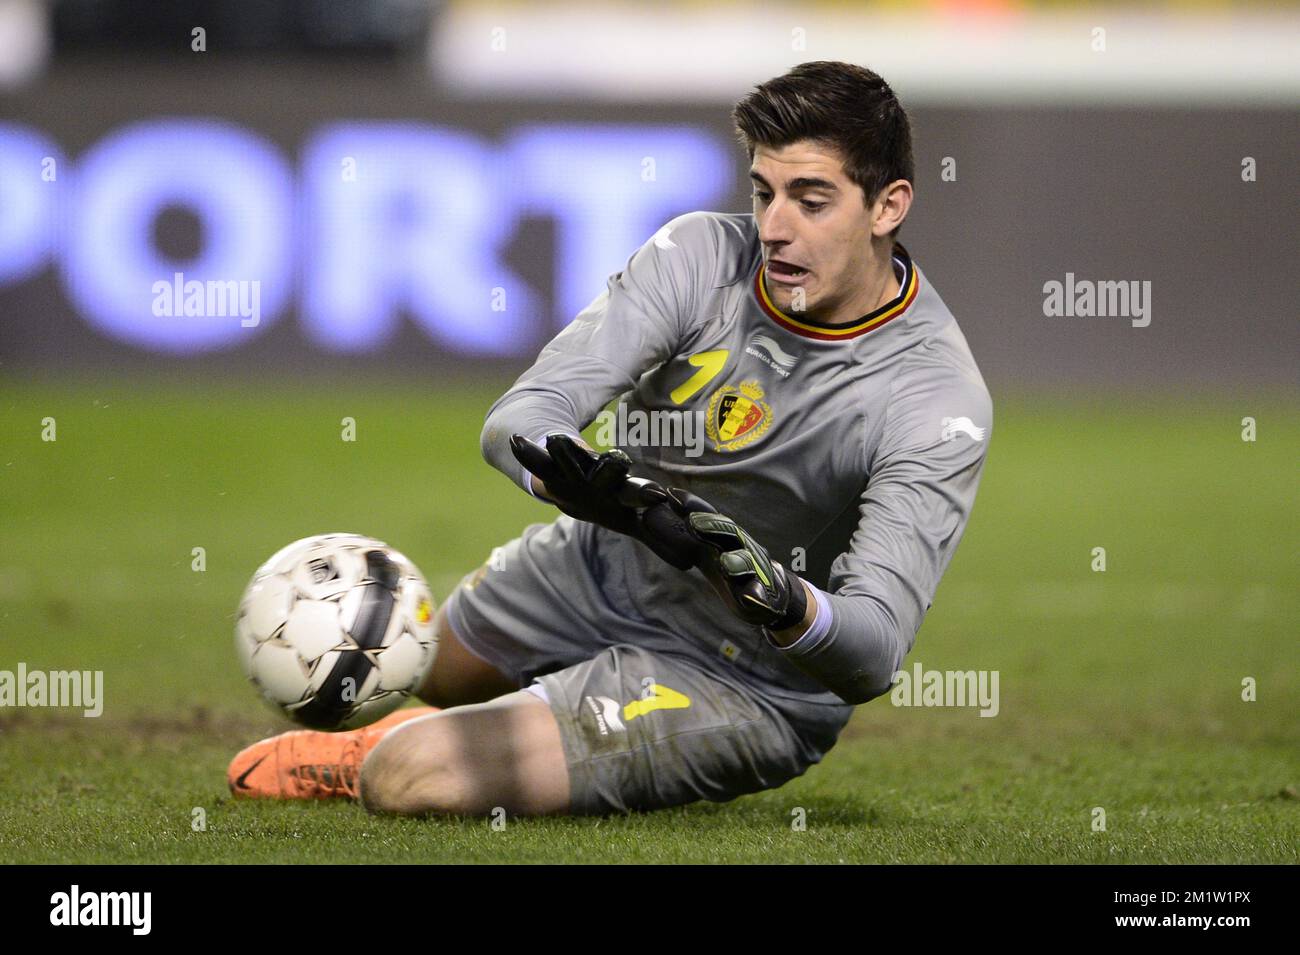 Belgium's goalkeeper Thibaut Courtois in action with the ball during a friendly soccer game between the Belgian national team the Red Devils and Ivory Coast, Wednesday 05 March 2014 in Brussels.  Stock Photo